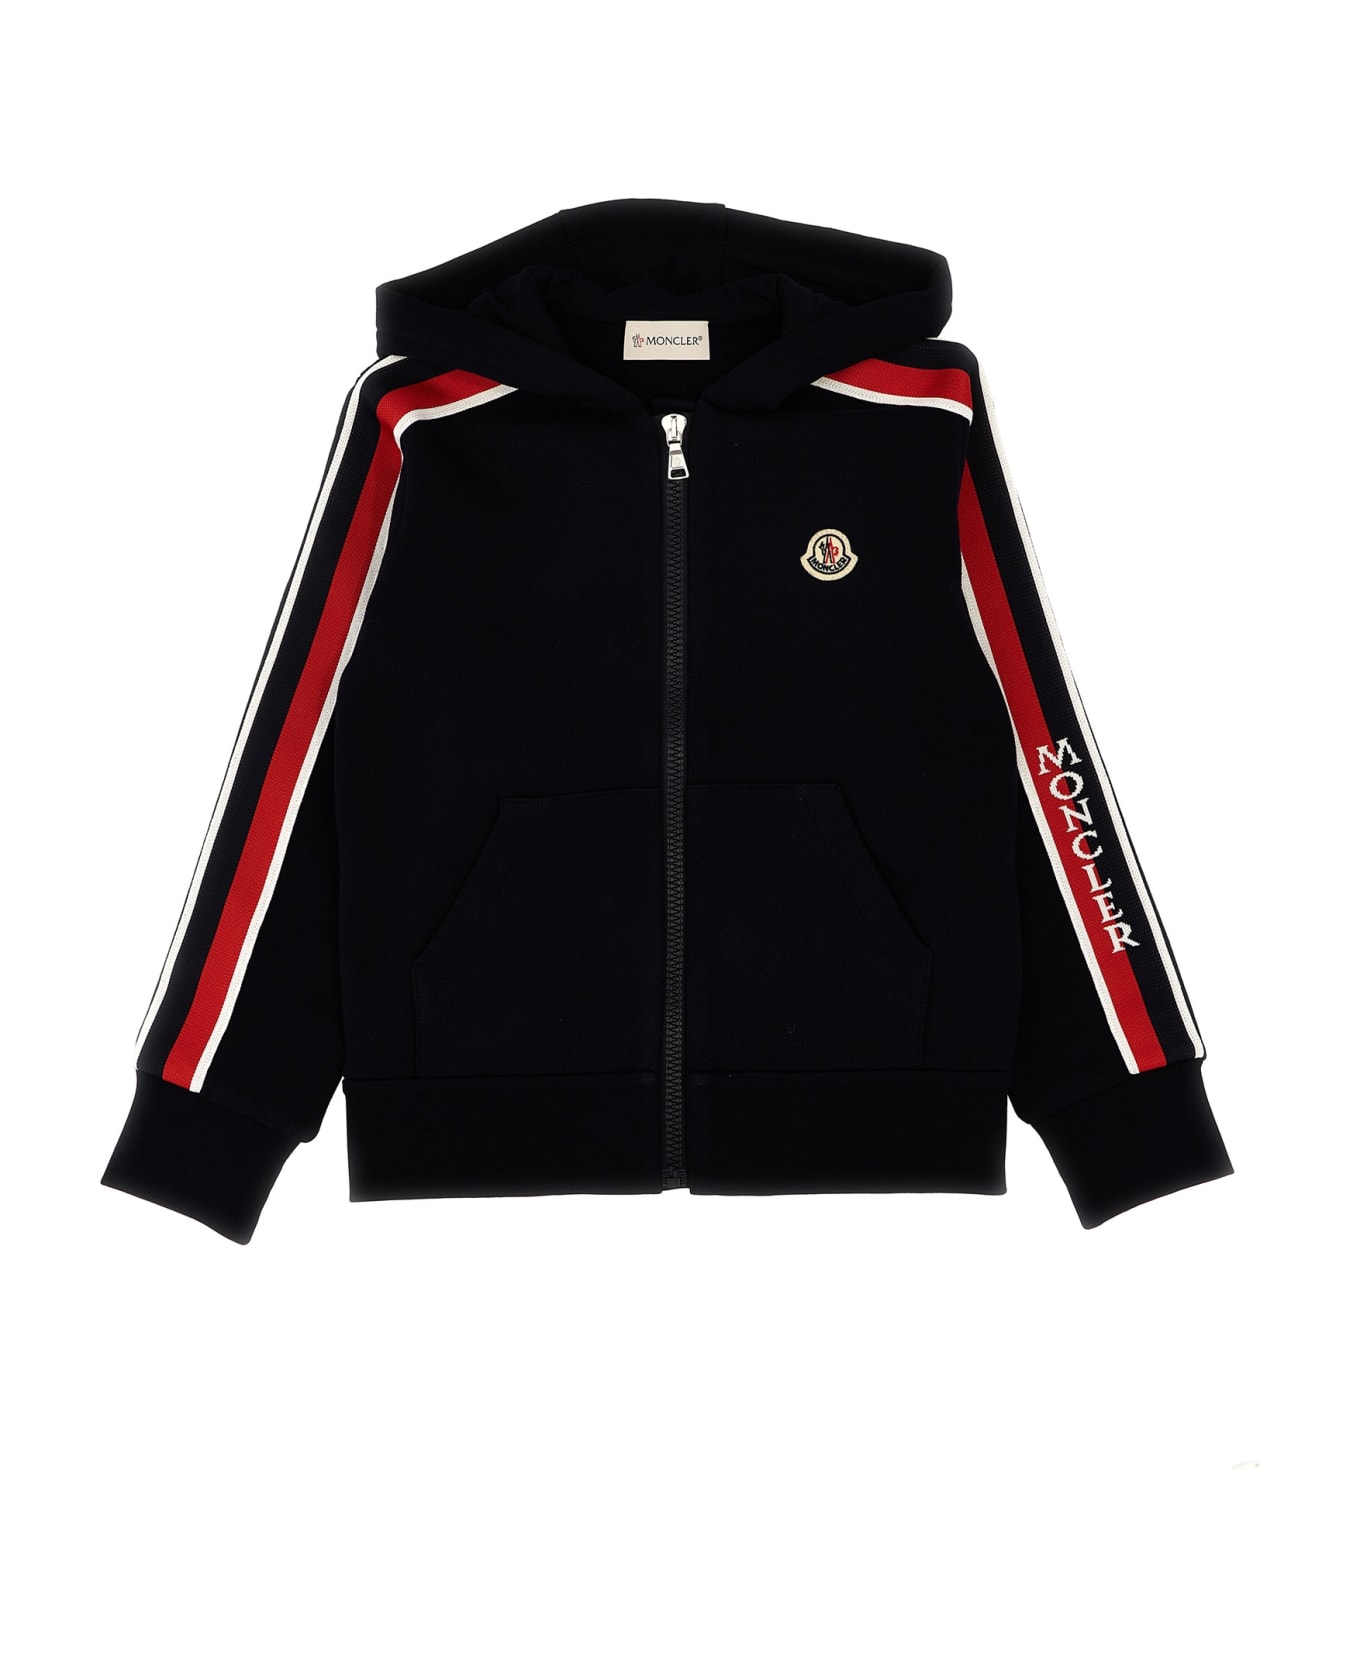 Moncler Logo Patch Hoodie